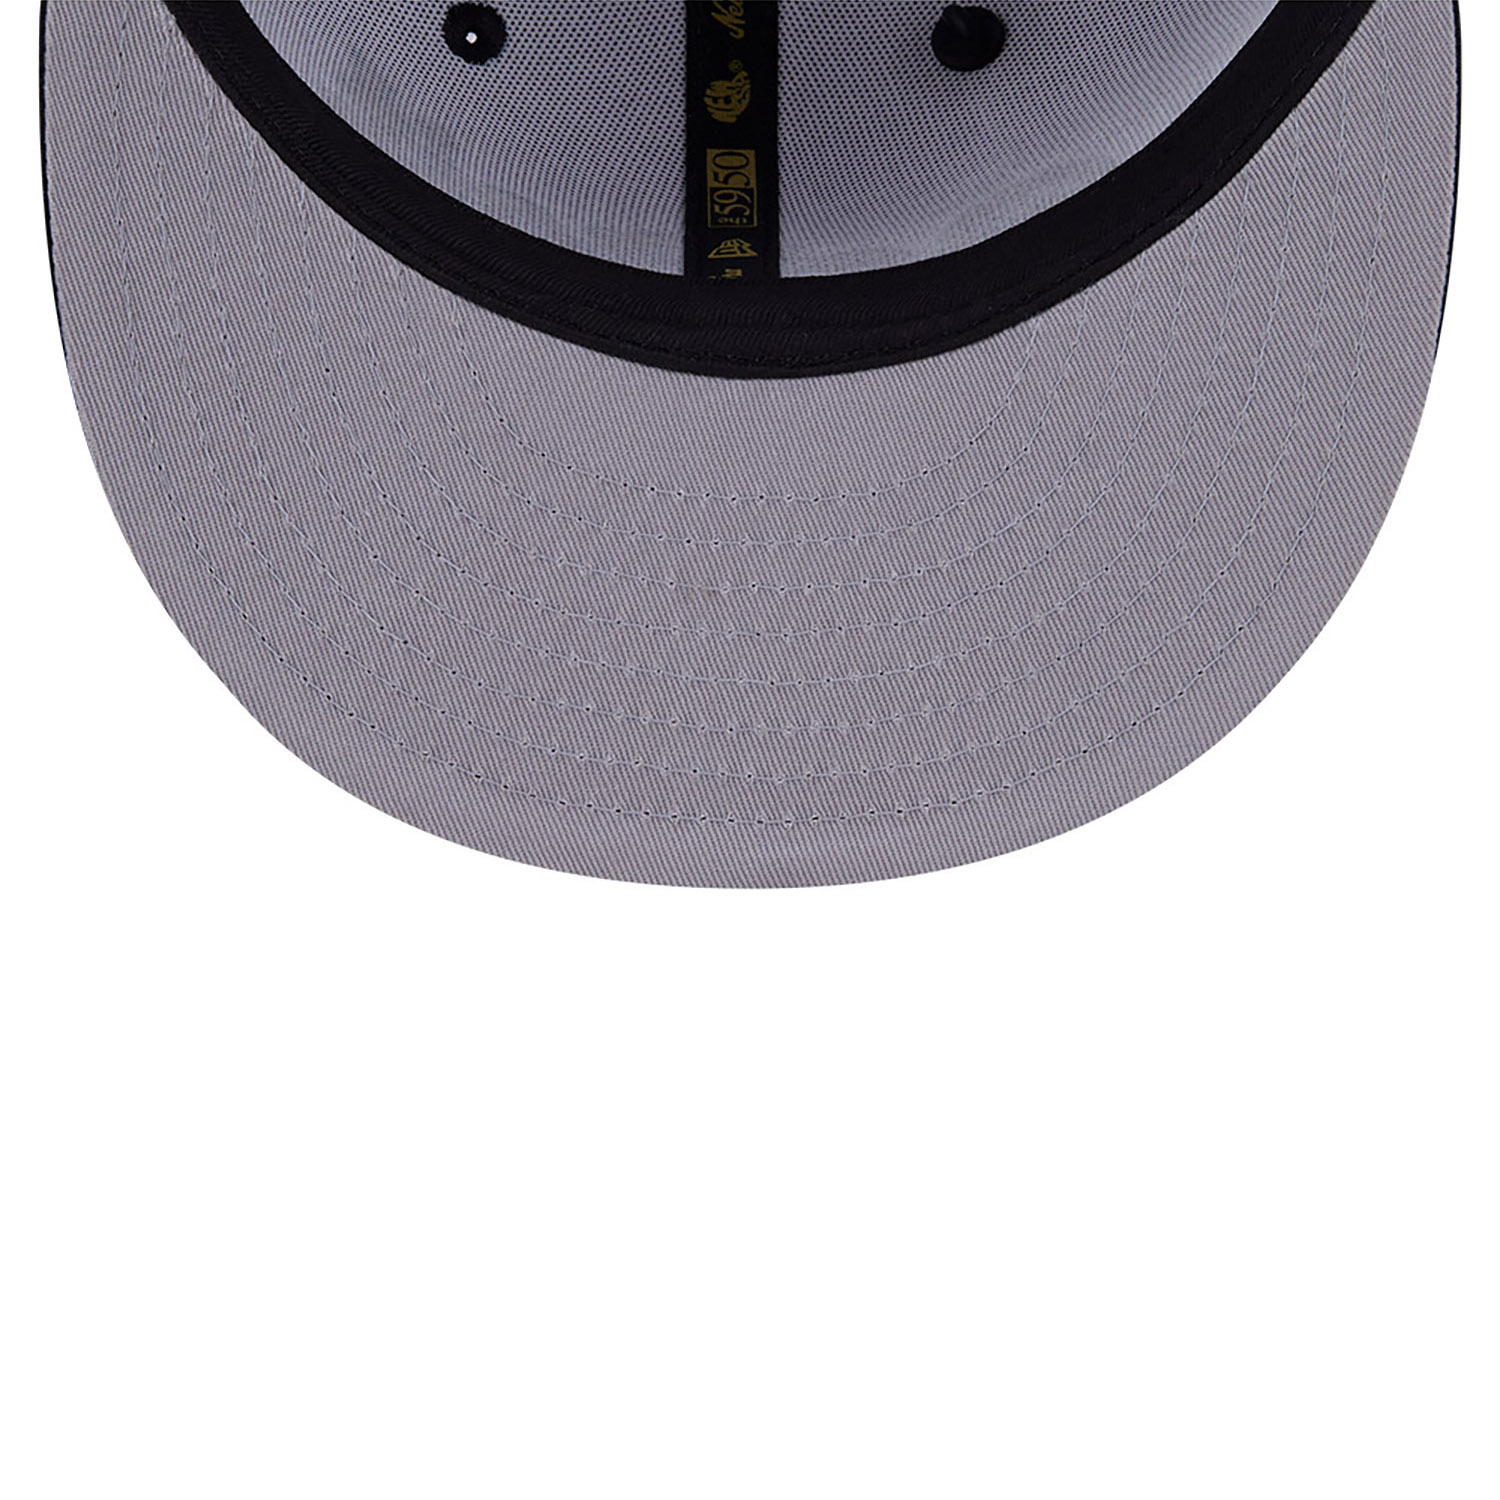 Detroit Tigers 59FIFTY Day White 59FIFTY Fitted Cap